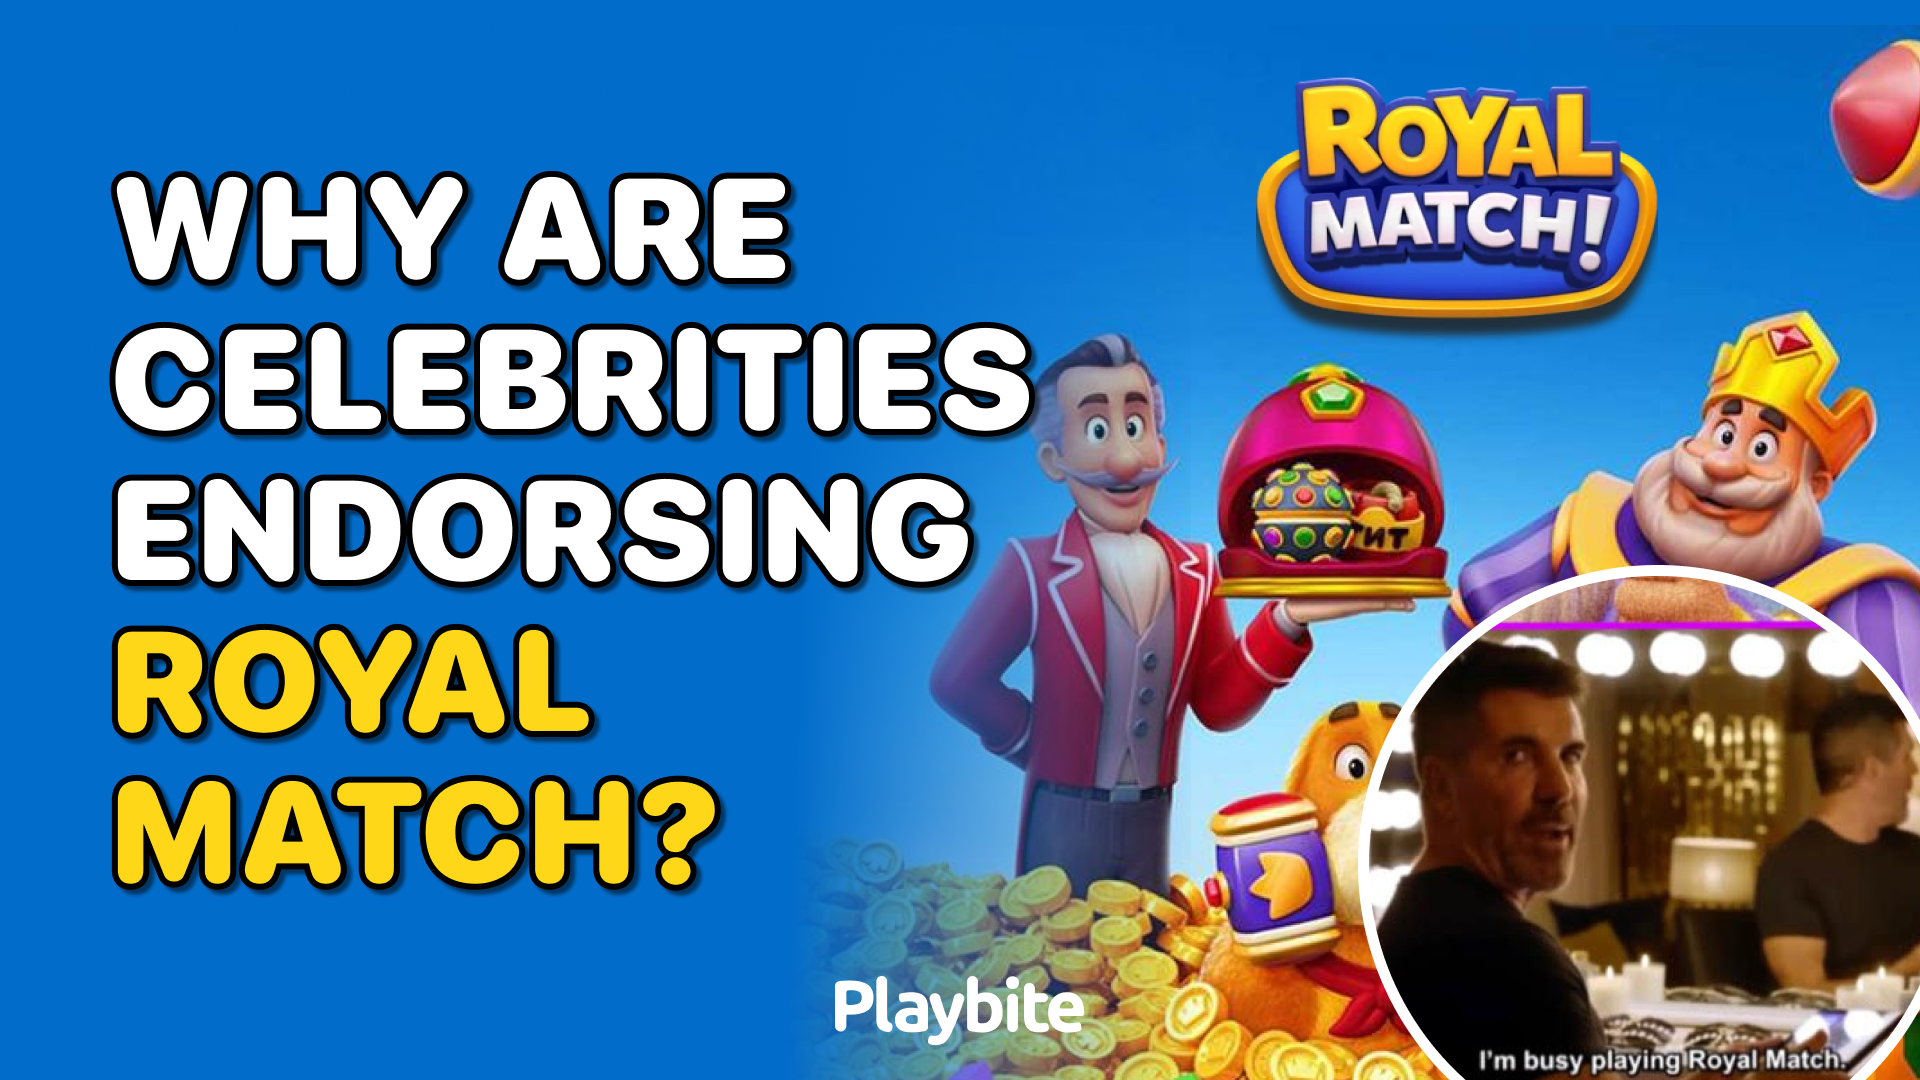 Why Are Celebrities Endorsing Royal Match?